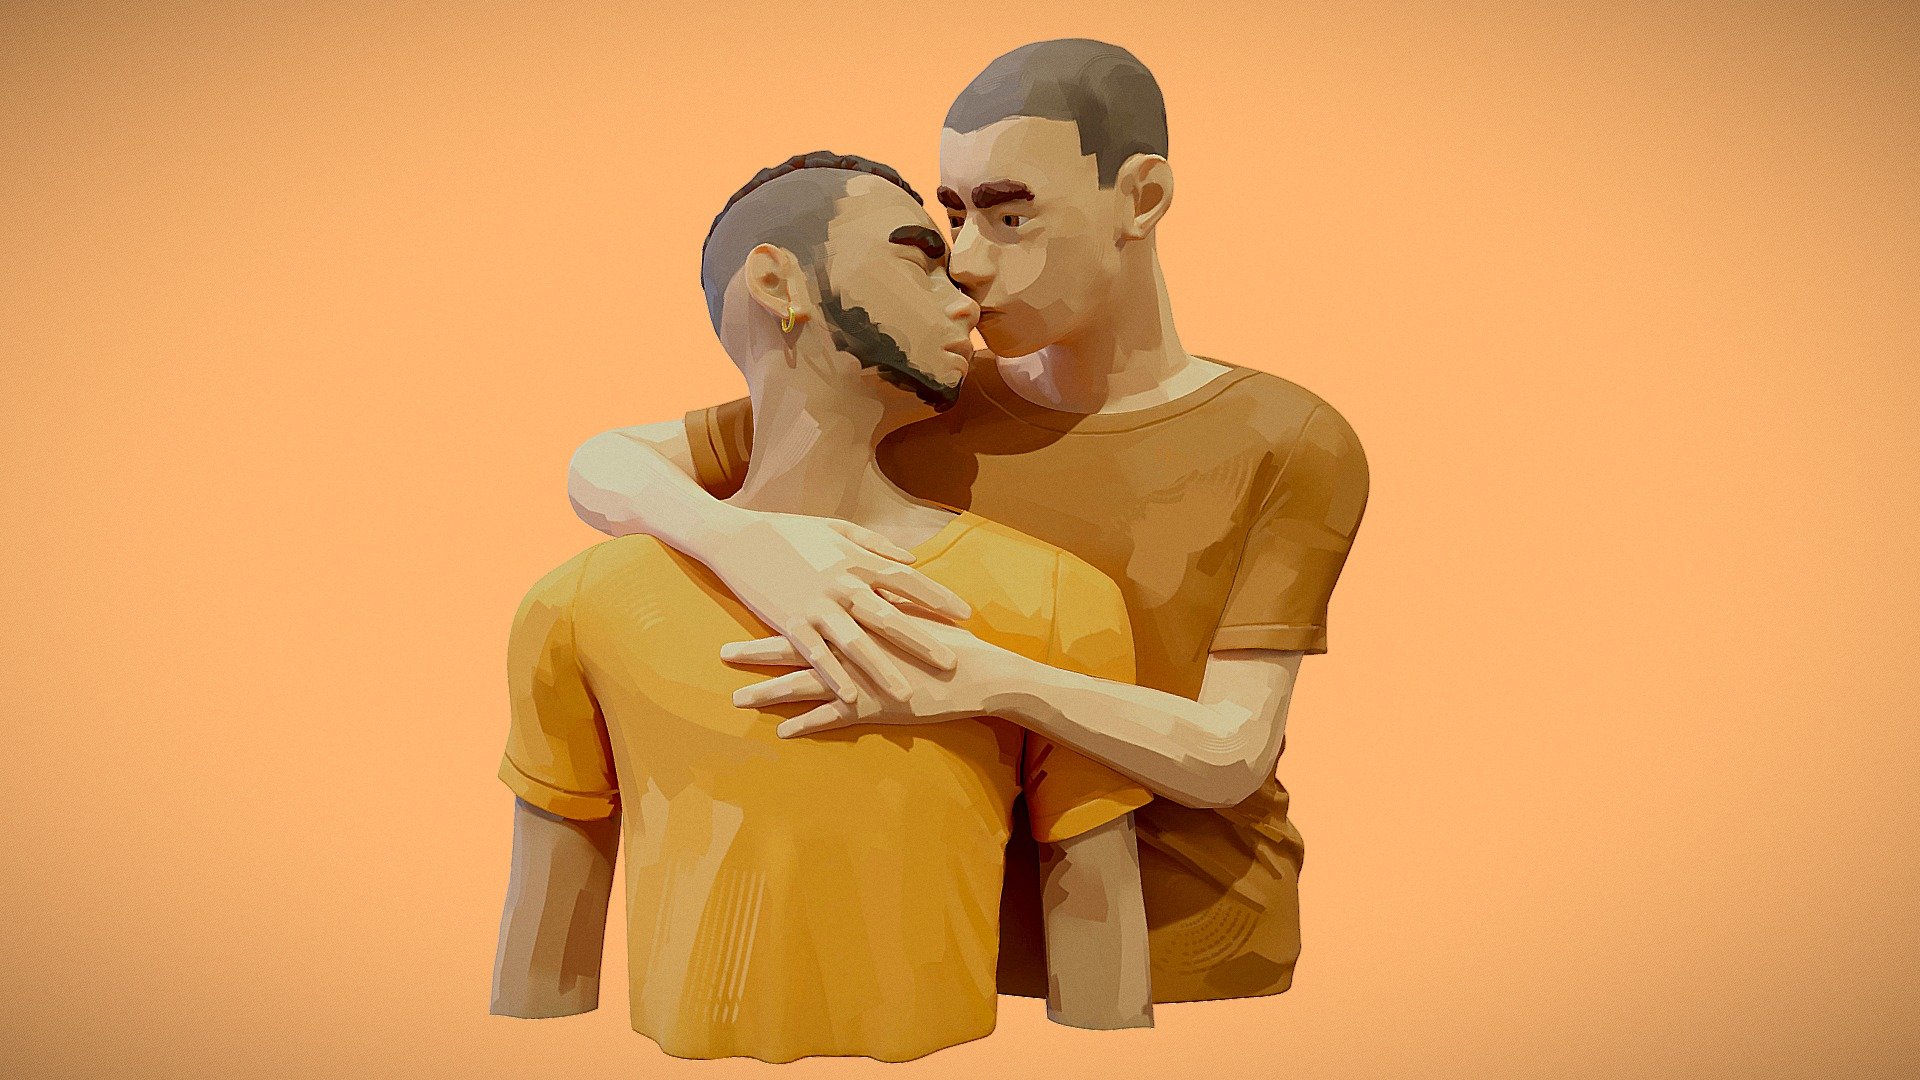 Two gays sculpted, baked and painted in Blender and Krita - 2 guys ⚣ - 3D model by wa_rouk 3d model